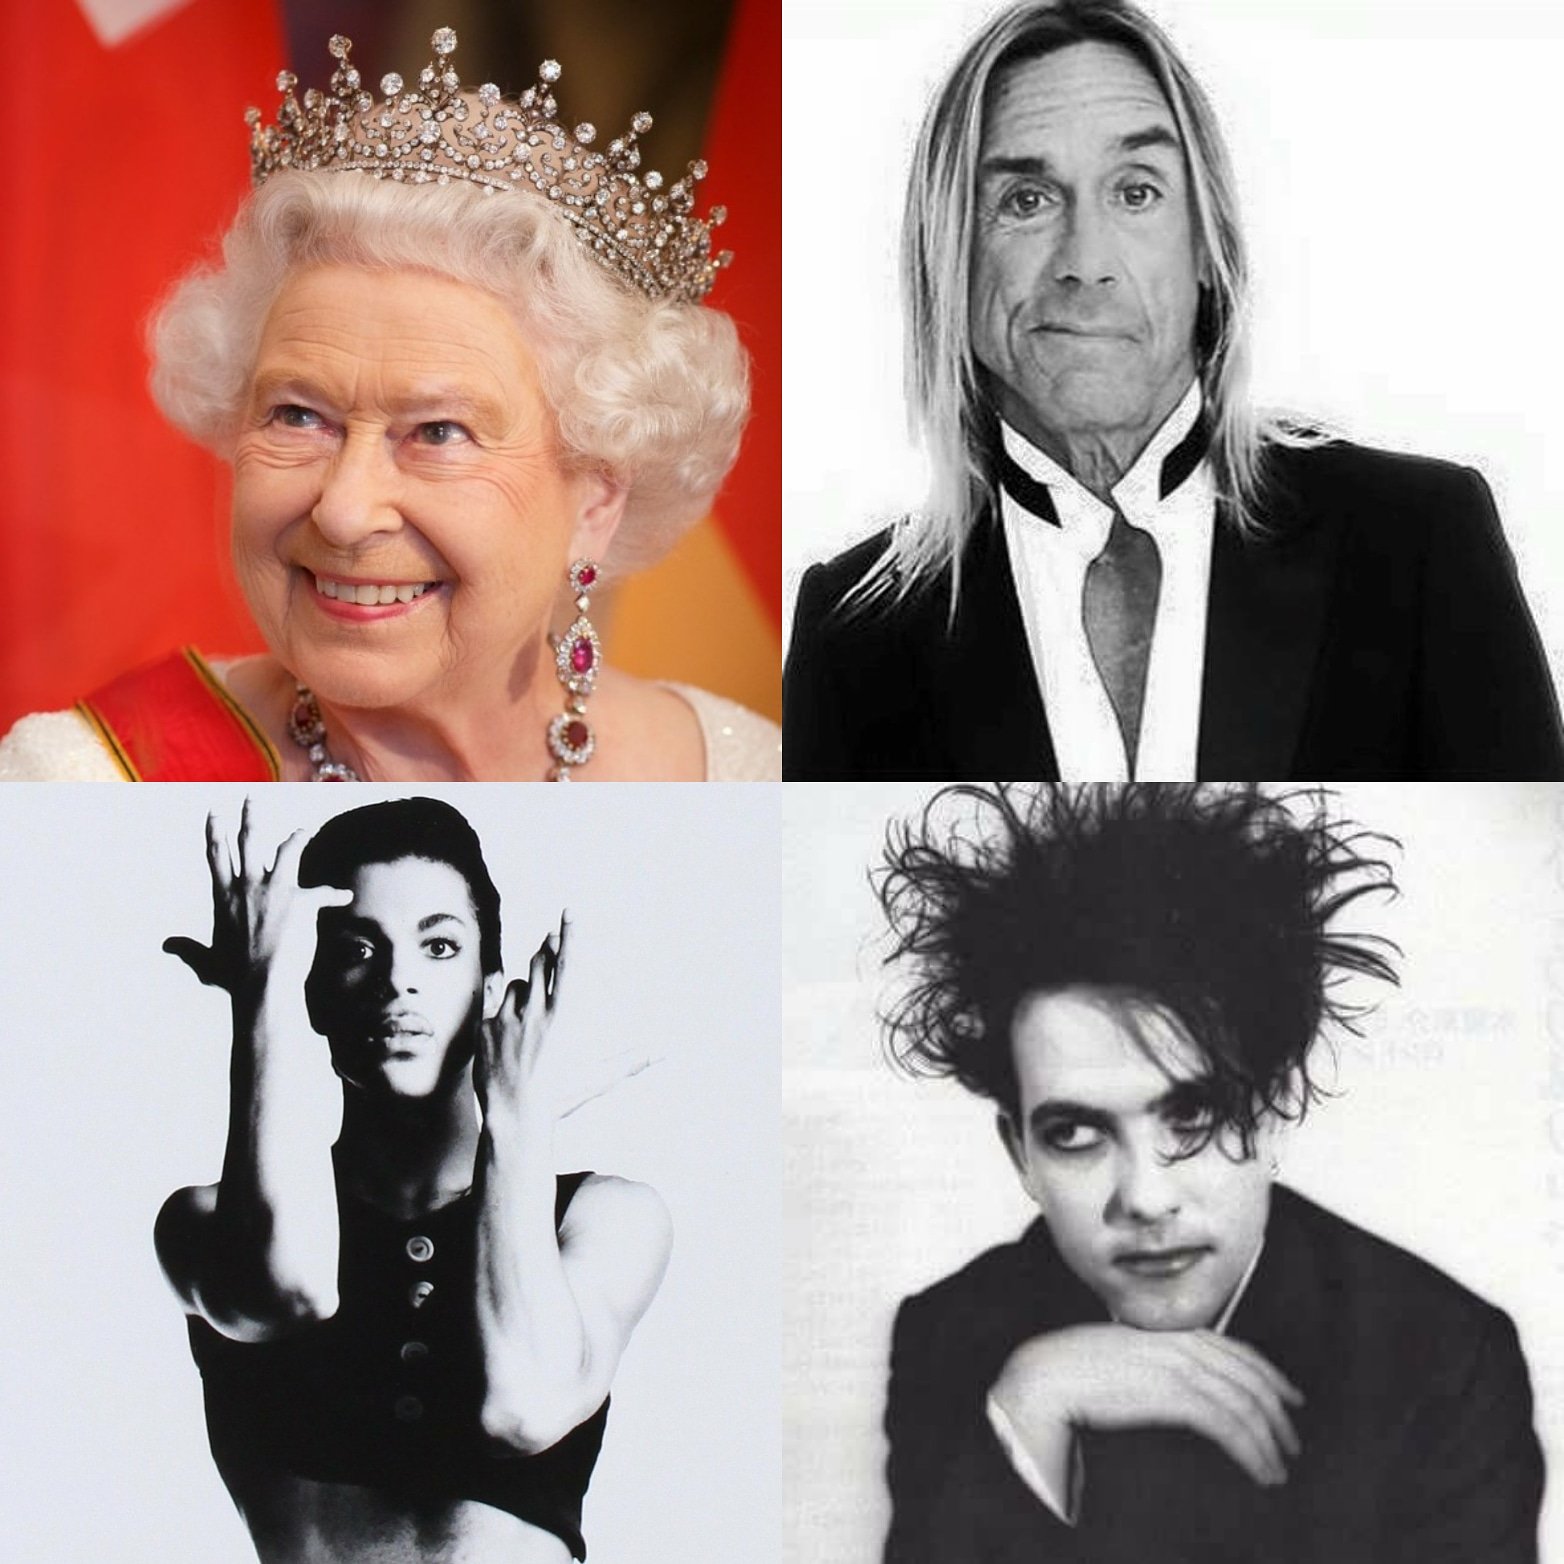 Today, say happy Birthday to The Queen, Iggy Pop, & Robert Smith. Also, today is the anniversary death of Prince. 